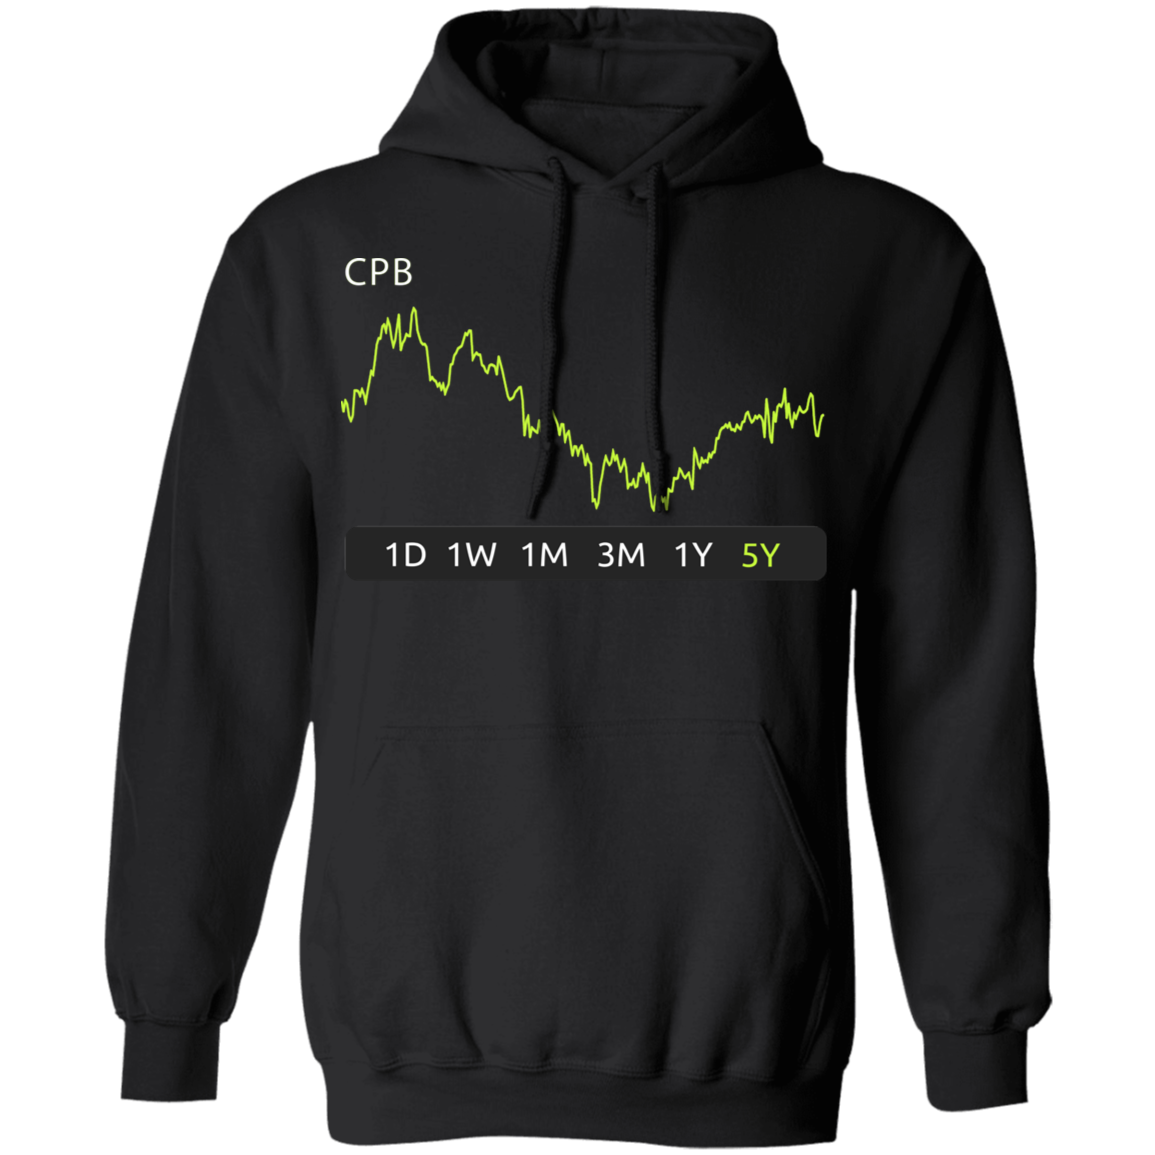 CPB Stock 5y Pullover Hoodie